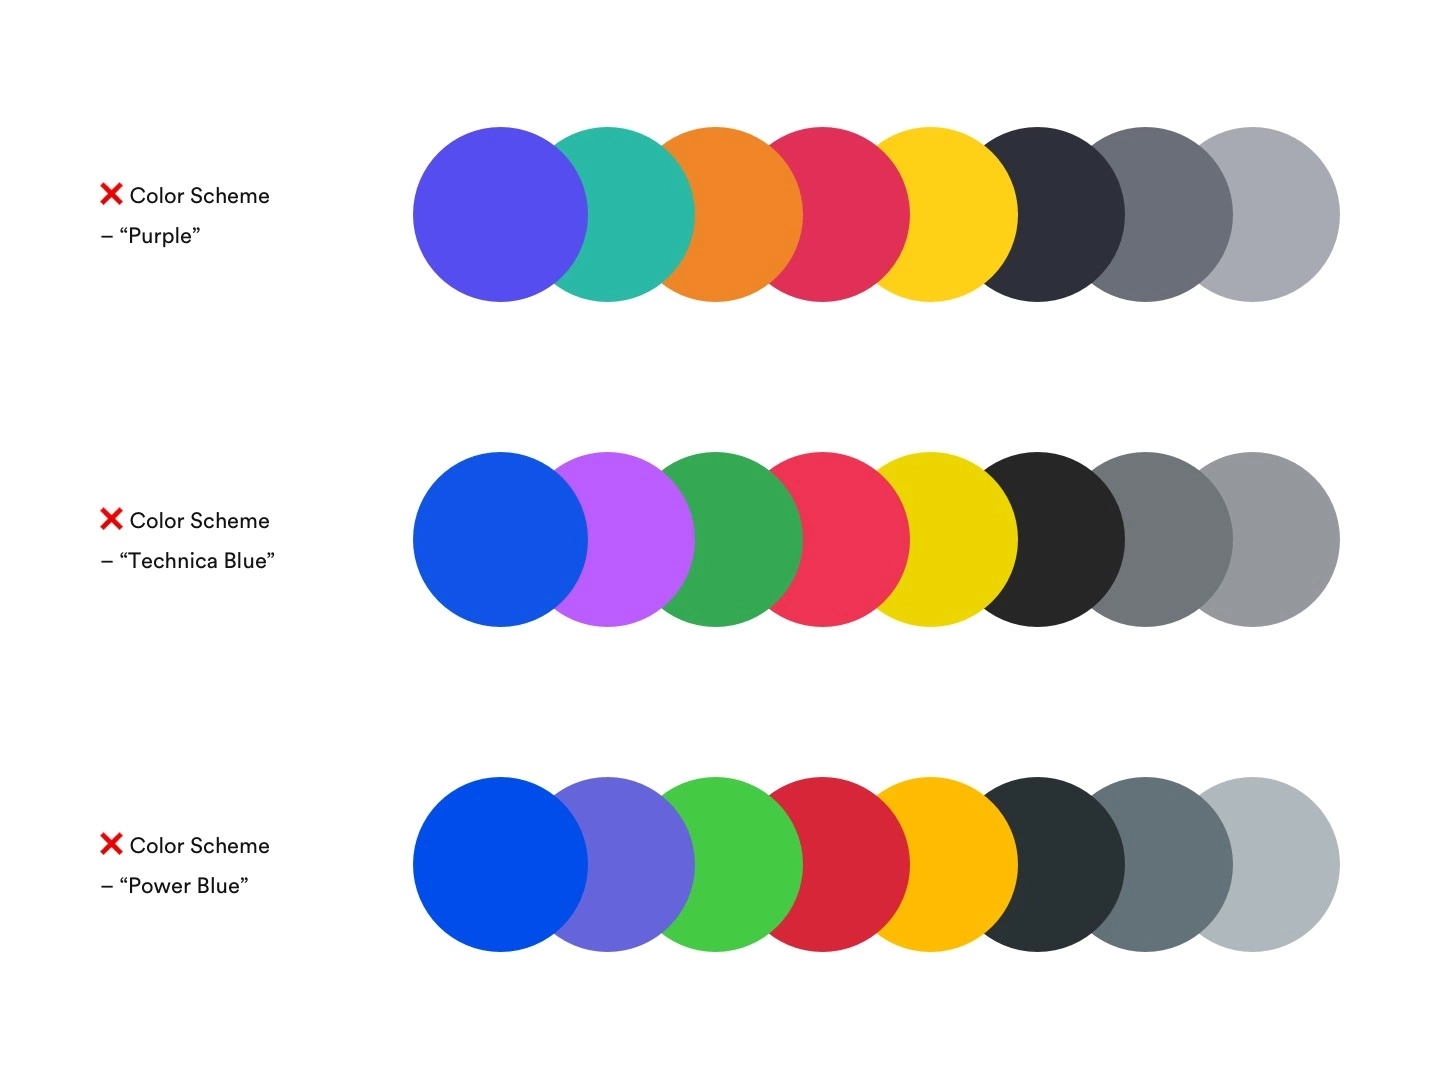 Color scheme shown in many circles with different colors